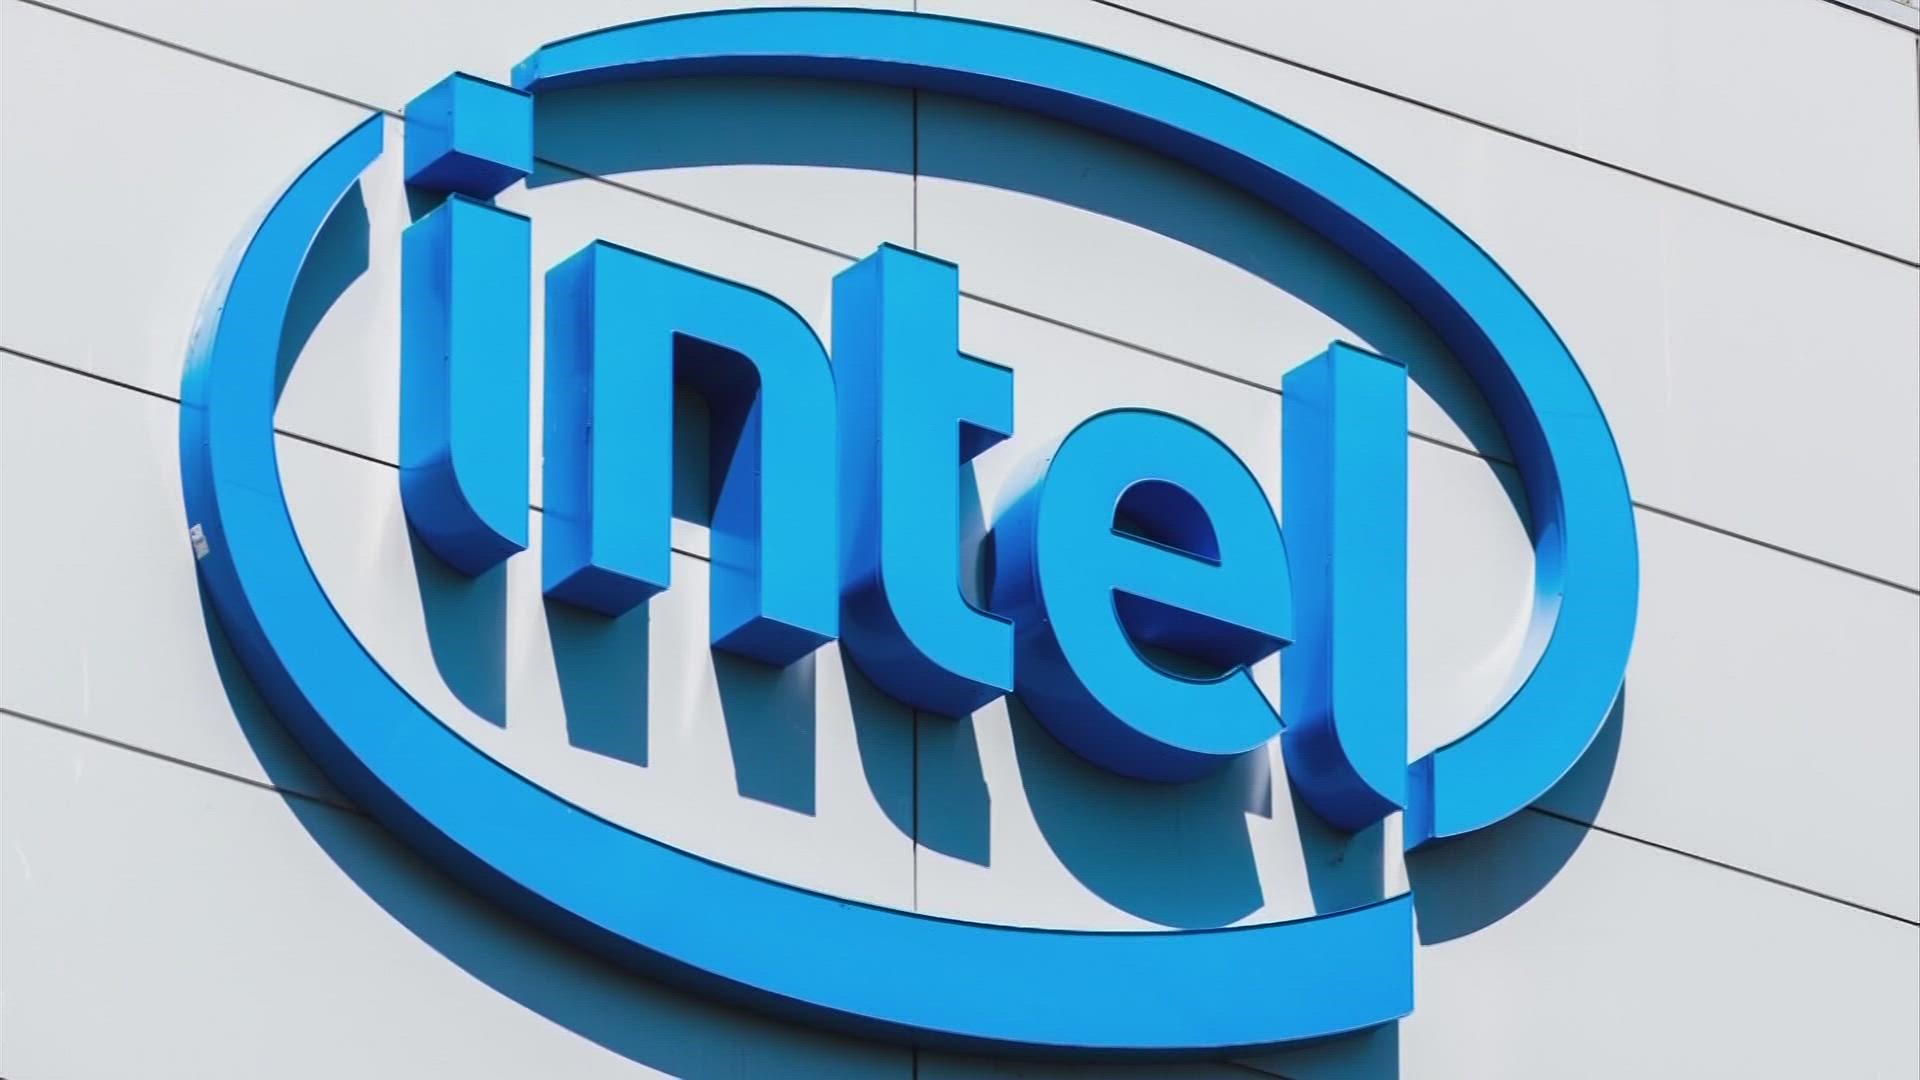 Intel has promised that 70% of the workers it plans to hire will have associate engineering degrees.